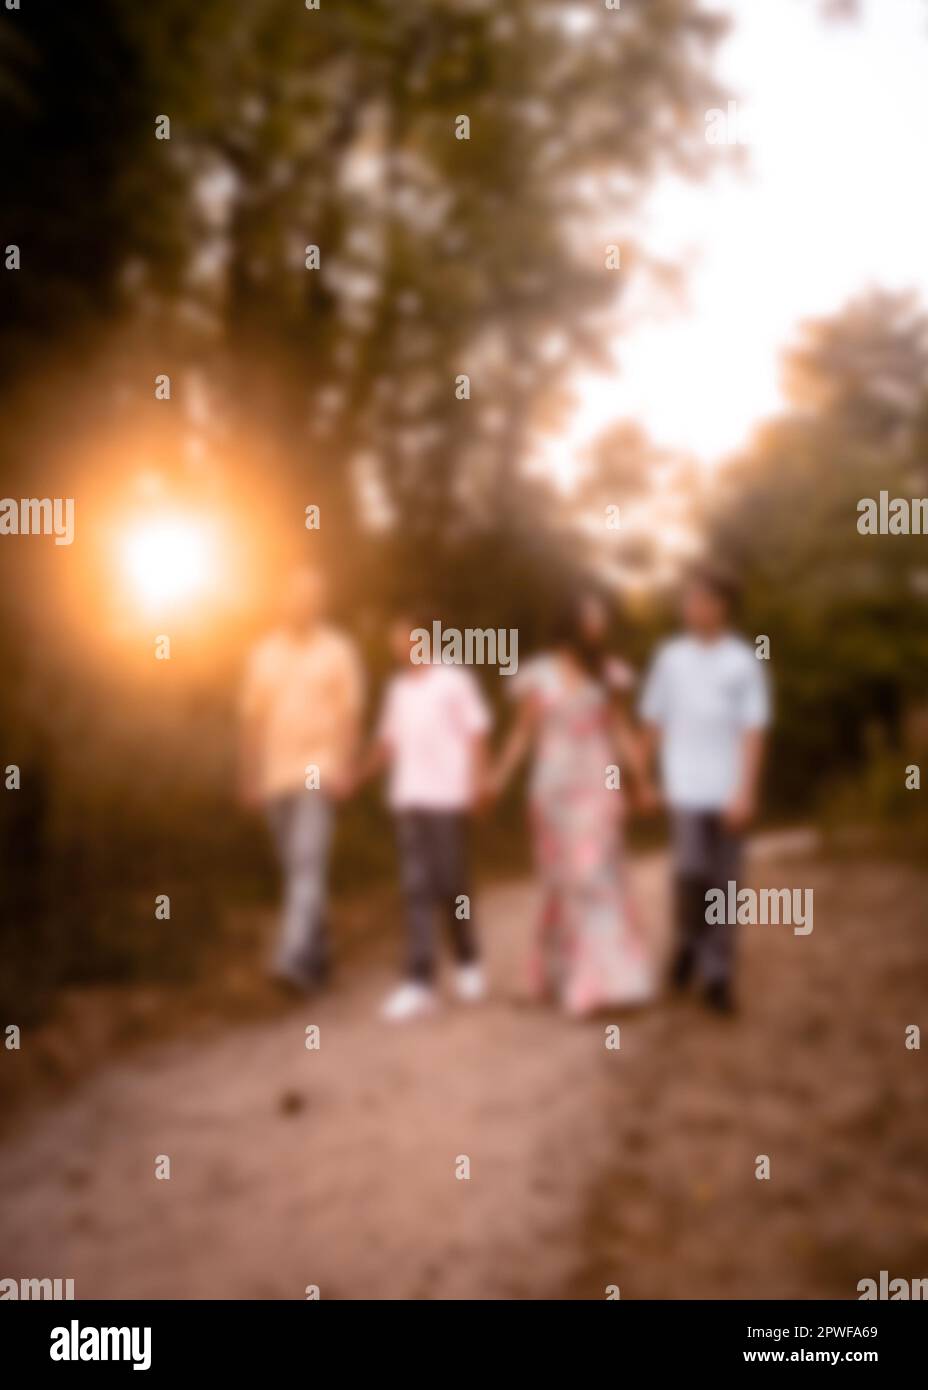 Defocused blur of family of four walking outdoors Stock Photo